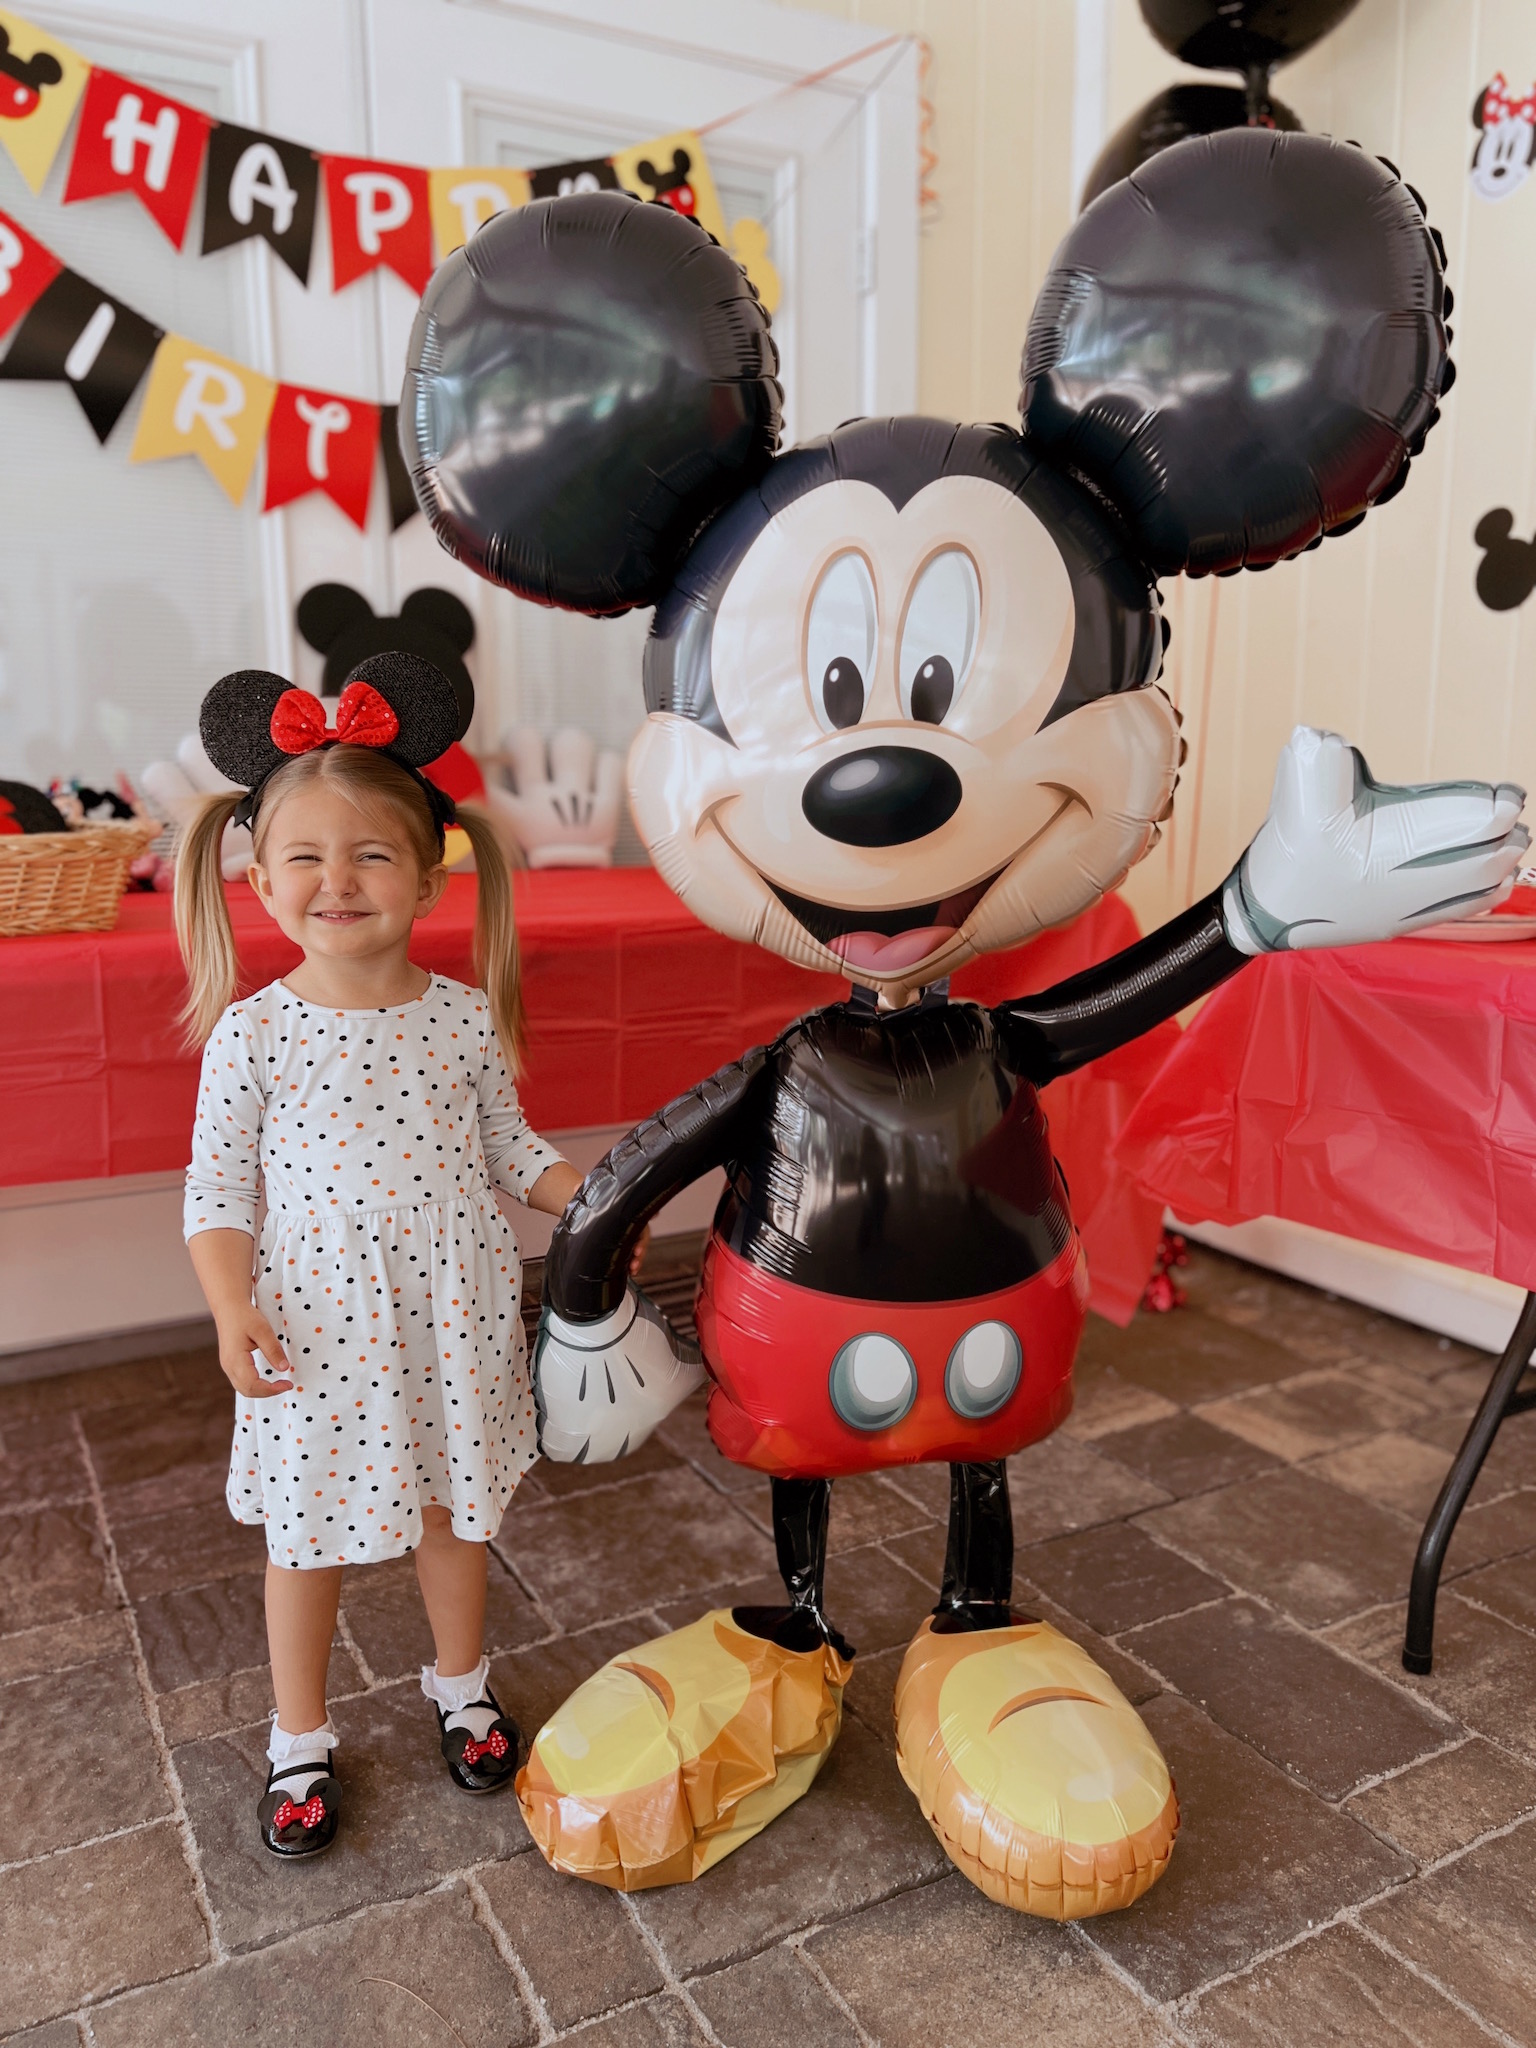 Magical Ideas for a “Mickey & Minnie Mouse” 3rd Birthday Party!